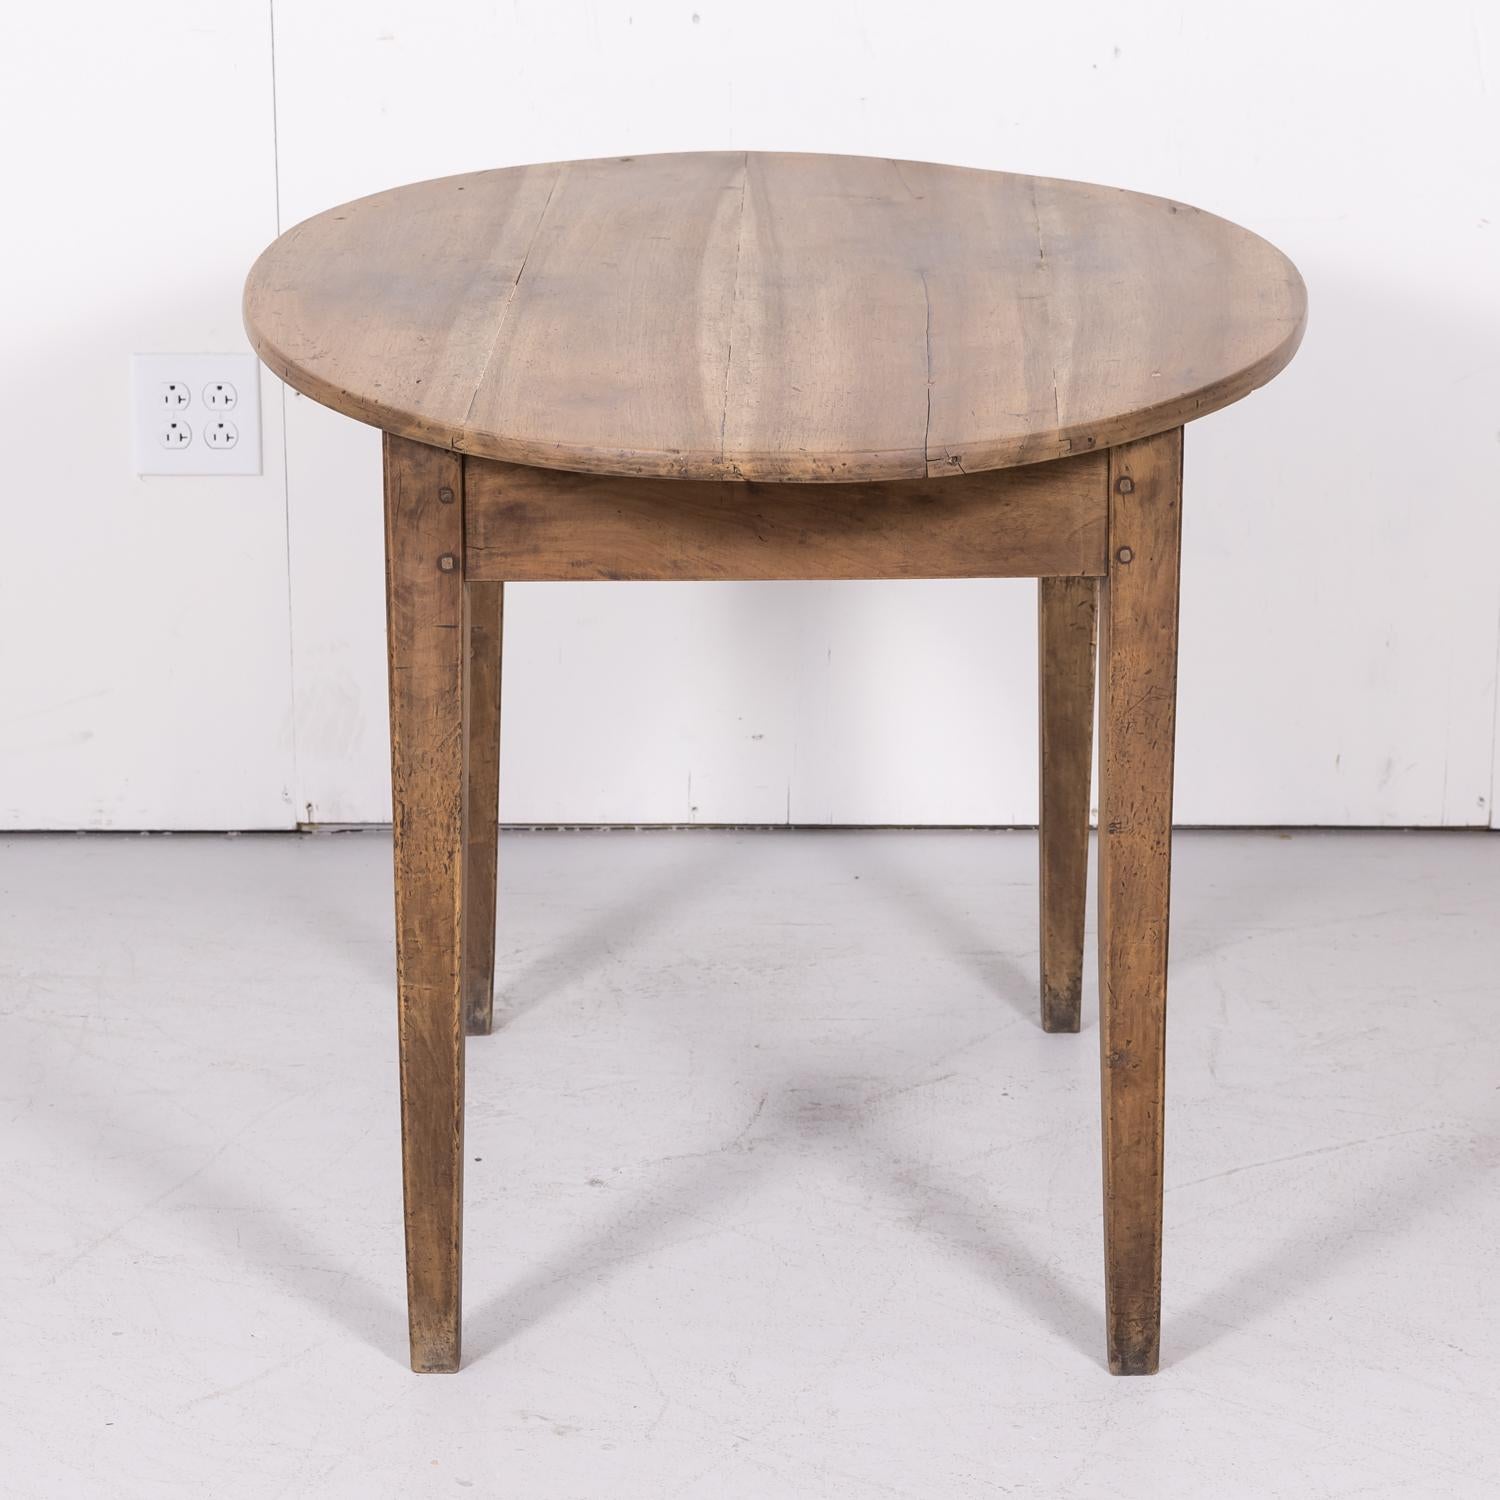 19th century Country French oval side table handcrafted in Lyon of solid walnut that has been bleached or washed to a natural finish and hand waxed to a beautiful patina, circa 1870s. Having an oval plank top over a single divided drawer, this